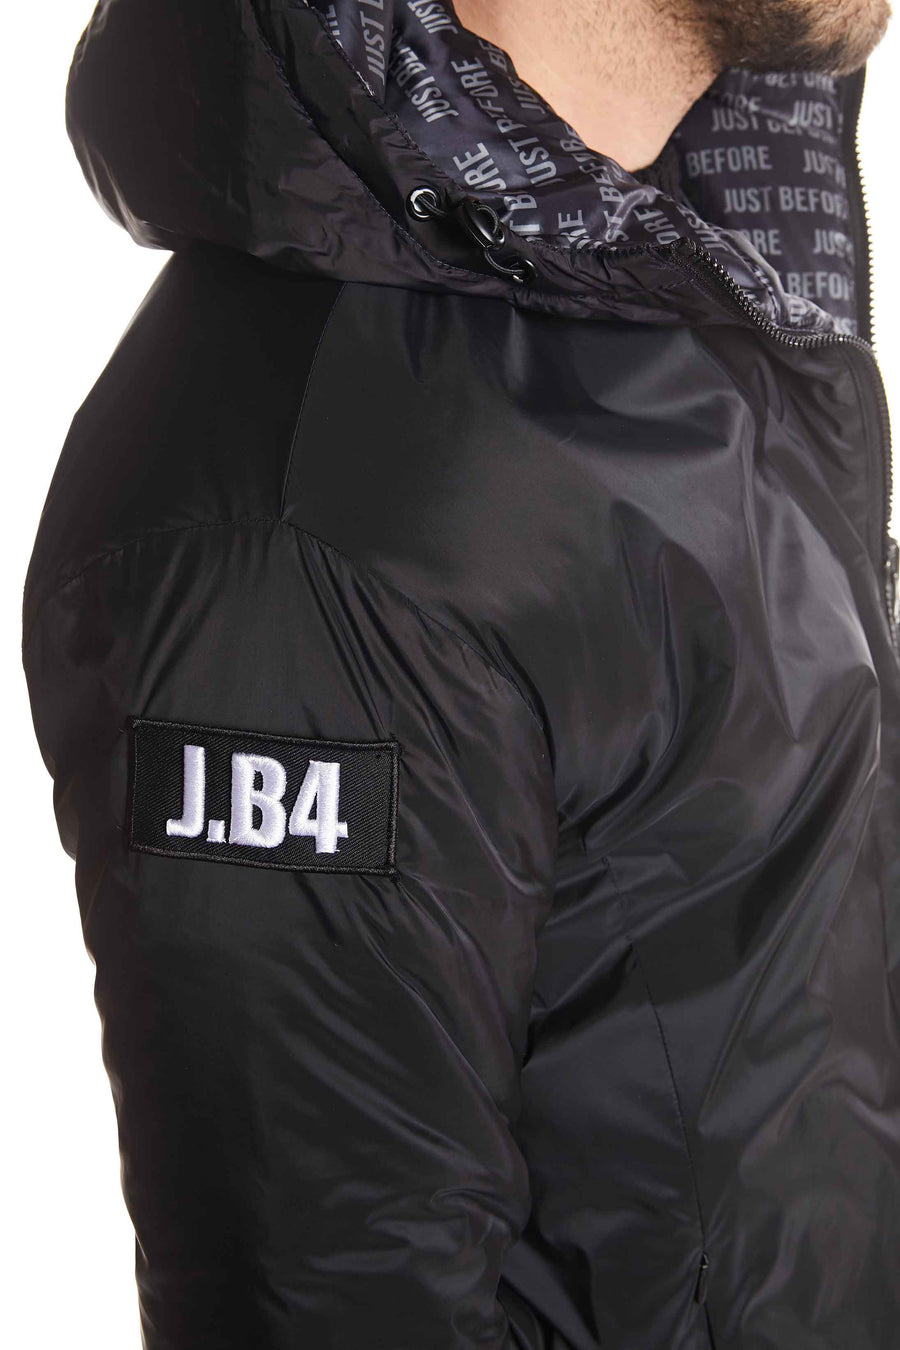 DOUBLE FACE LIGHT DOWN JACKET WITH BLACK LOGO